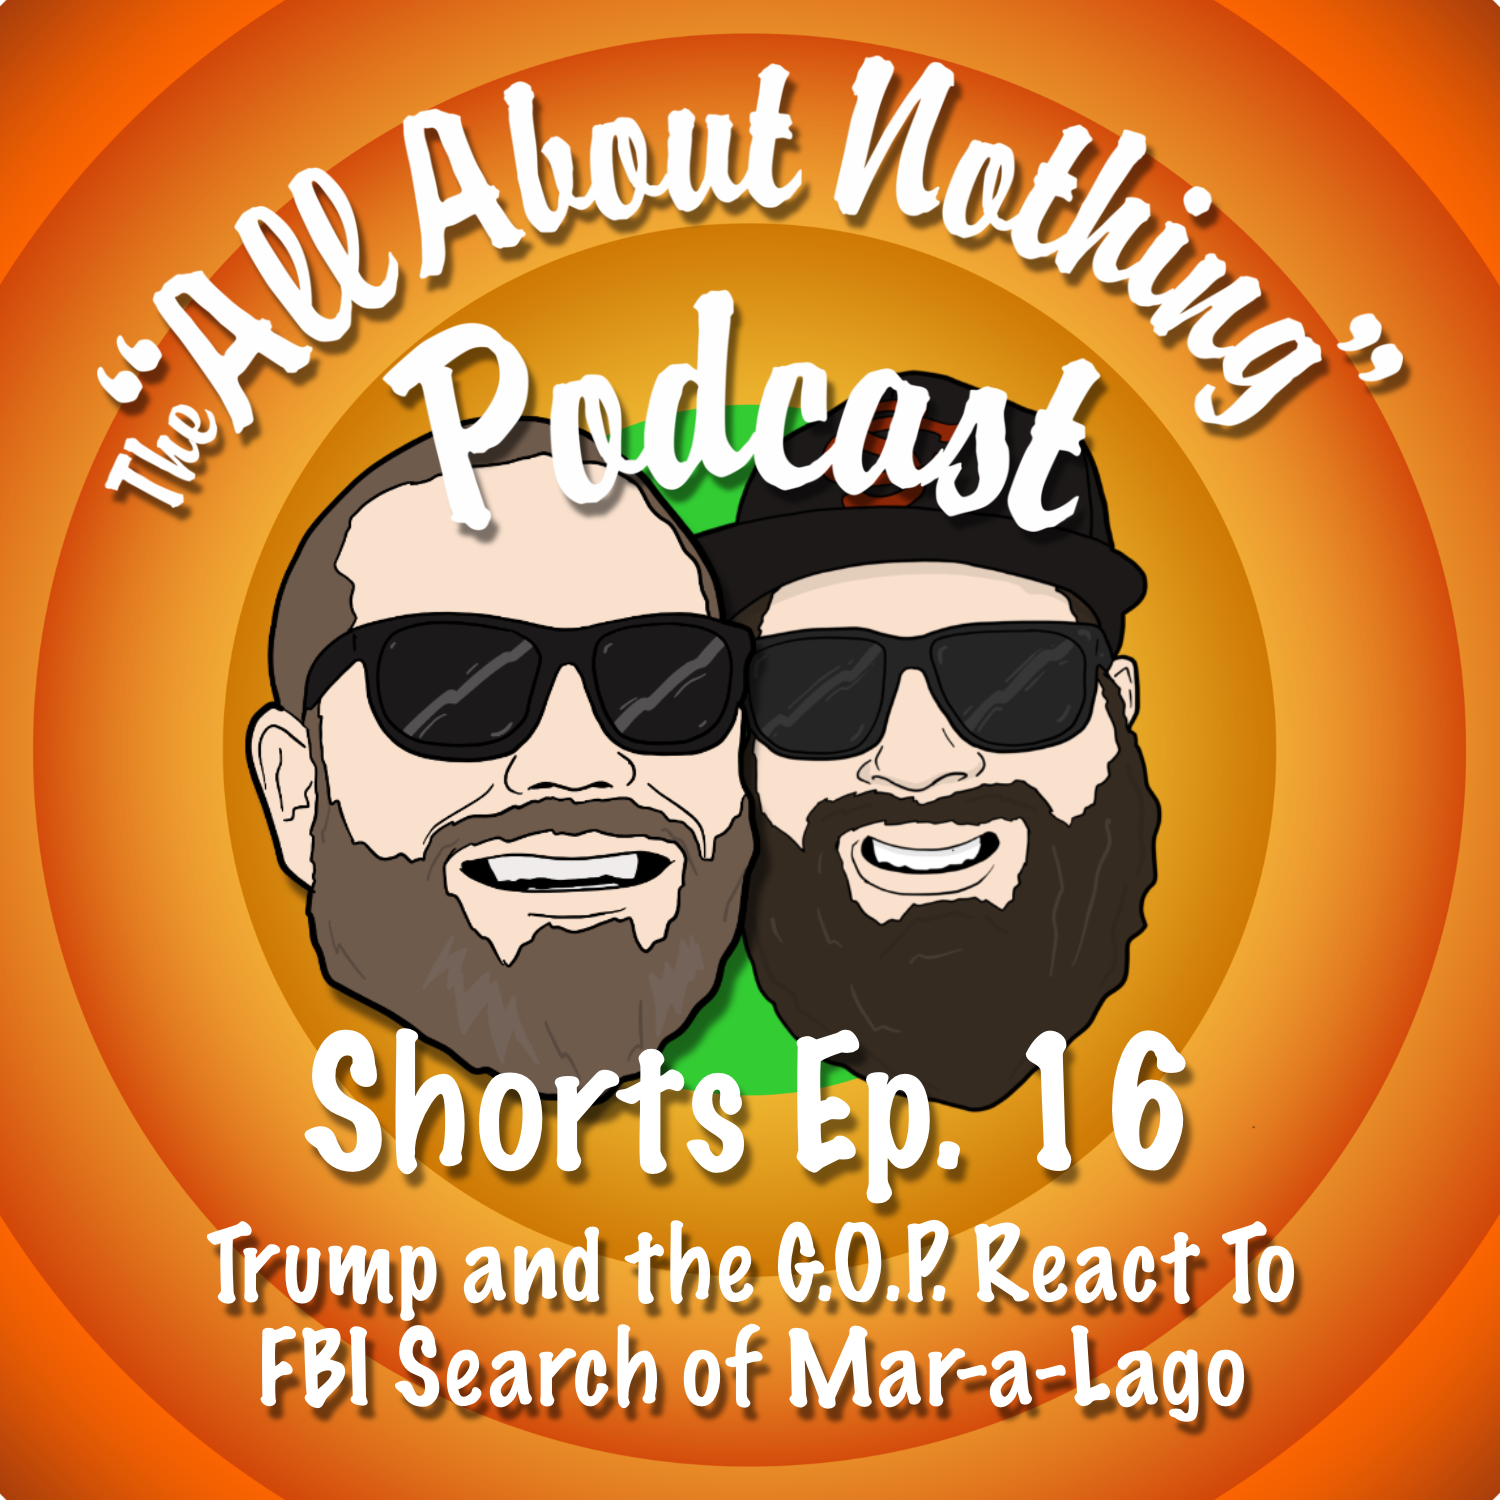 Artwork for podcast The All About Nothing: Podcast